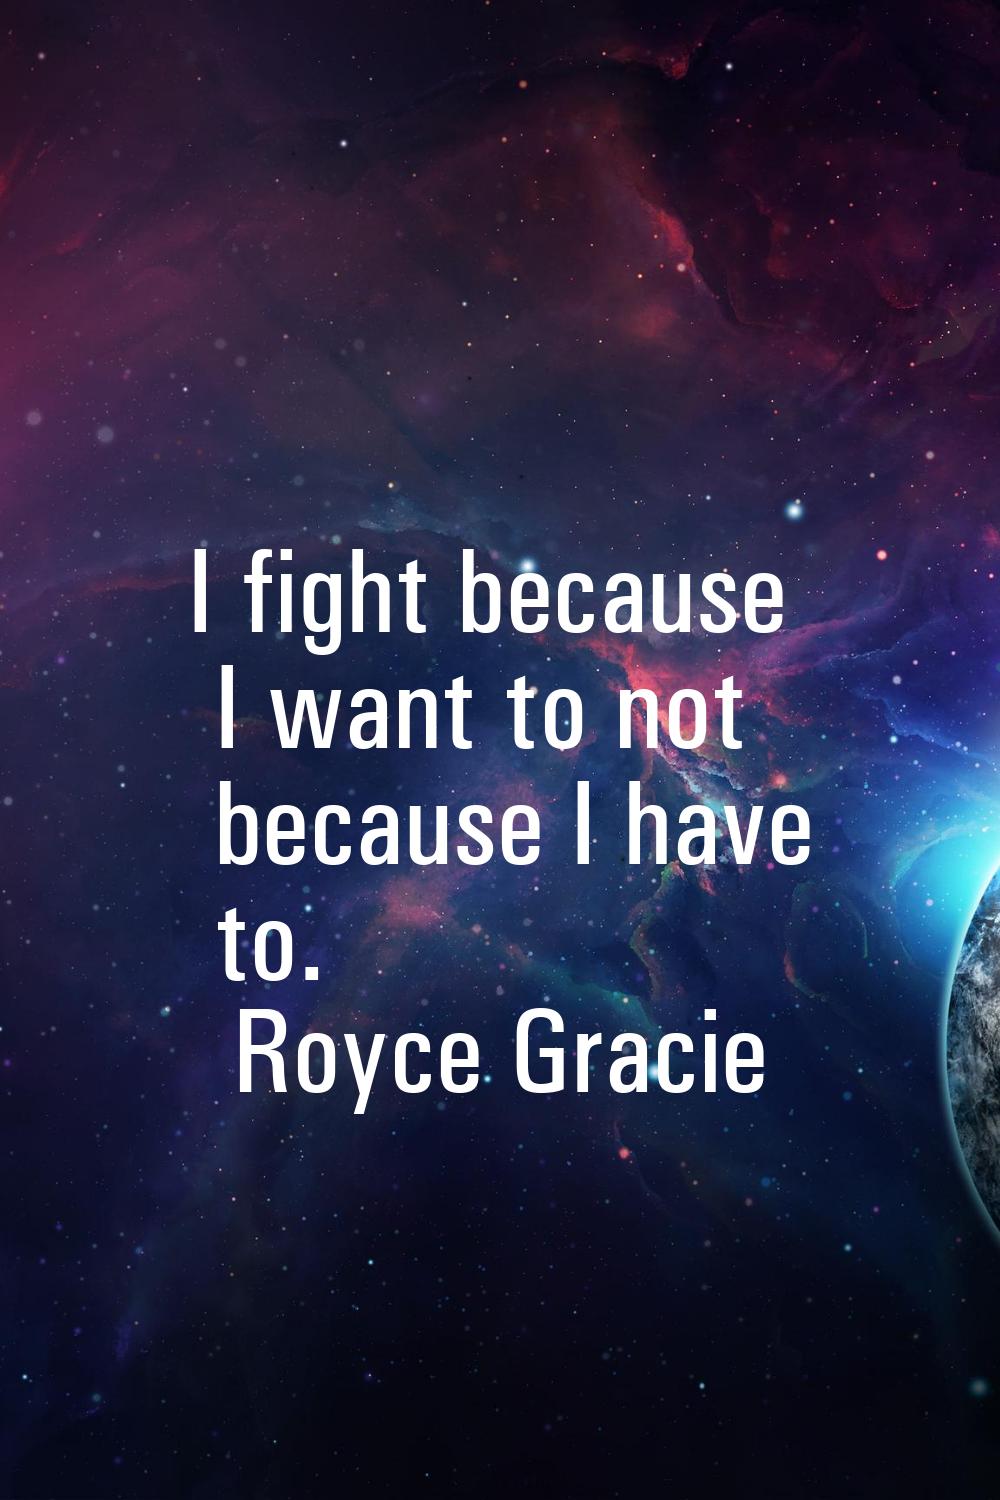 I fight because I want to not because I have to.